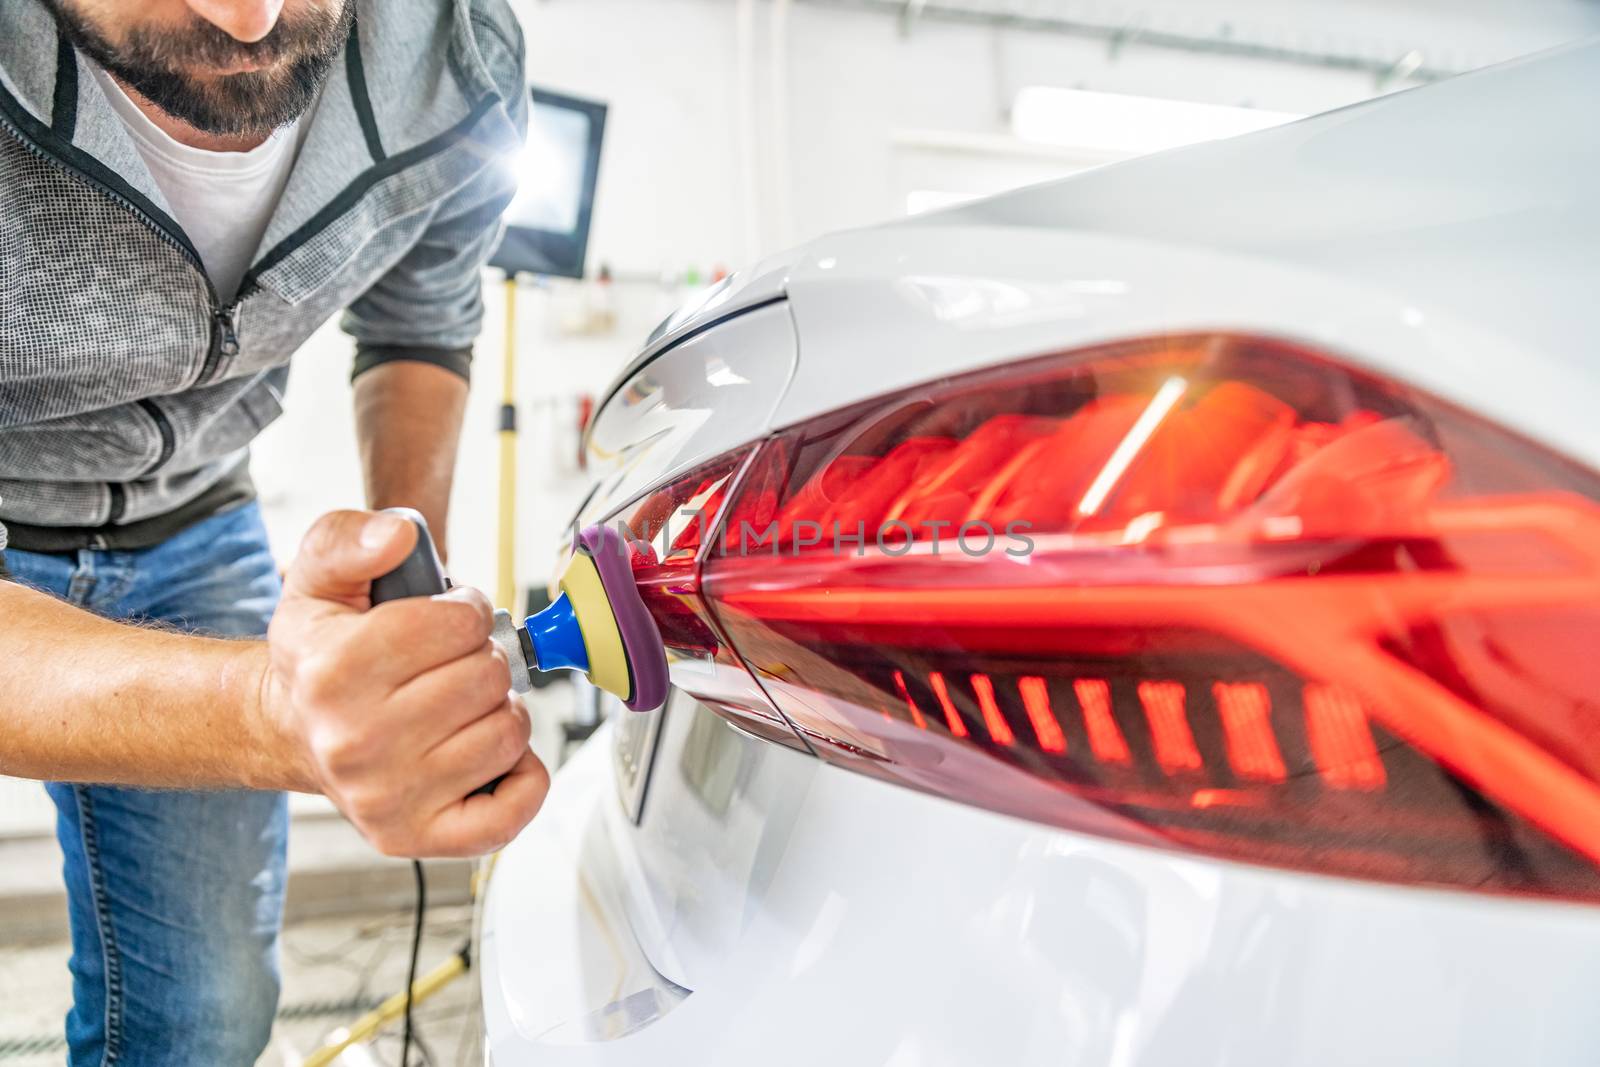 manual polishing of the headlight of luxury cars with the application of protective equipment.